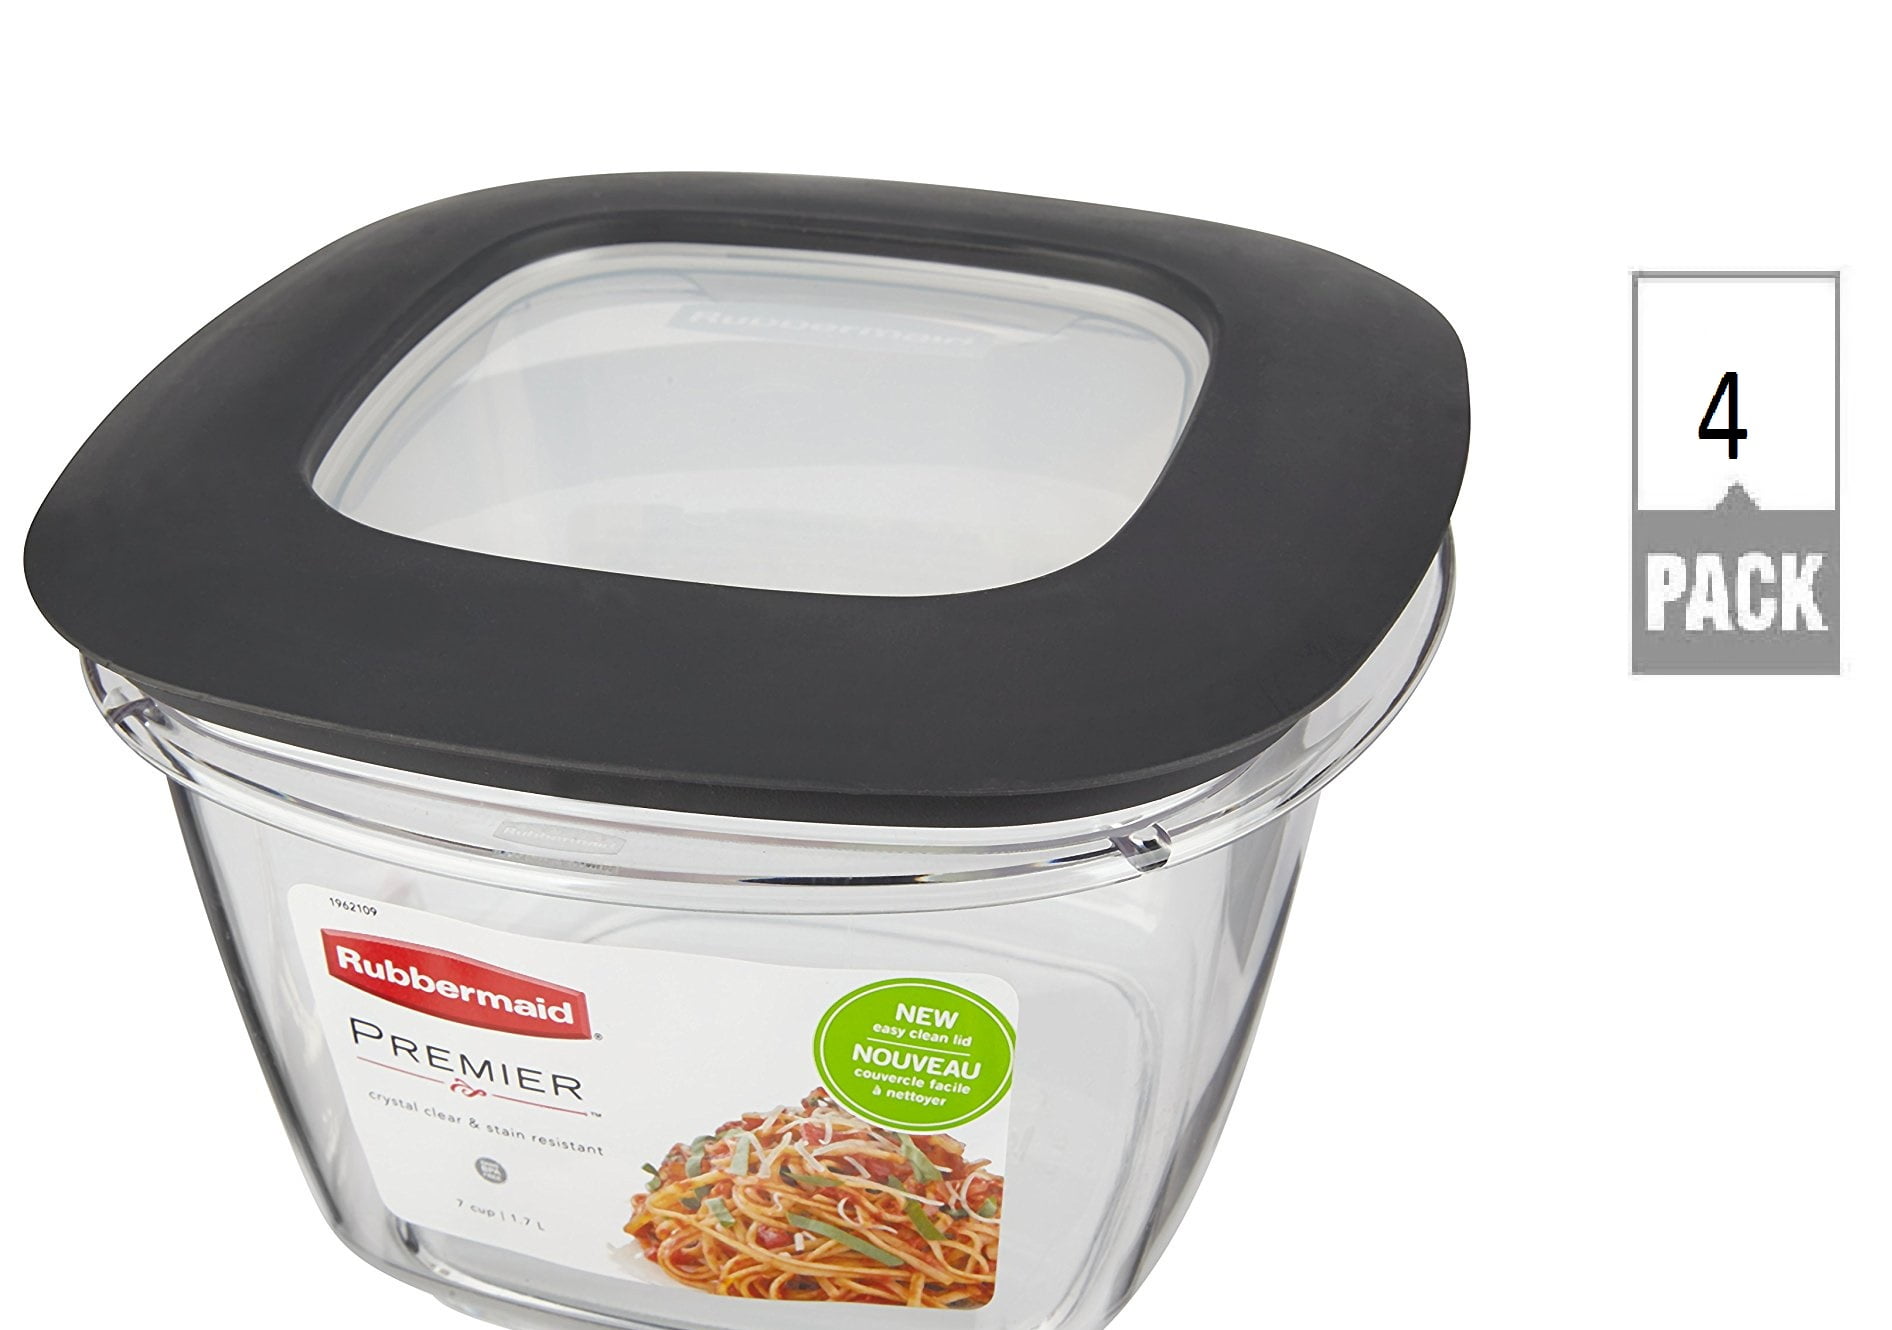 Rubbermaid Premier Food Storage Container 7 Cup Grey (Pack Of 4